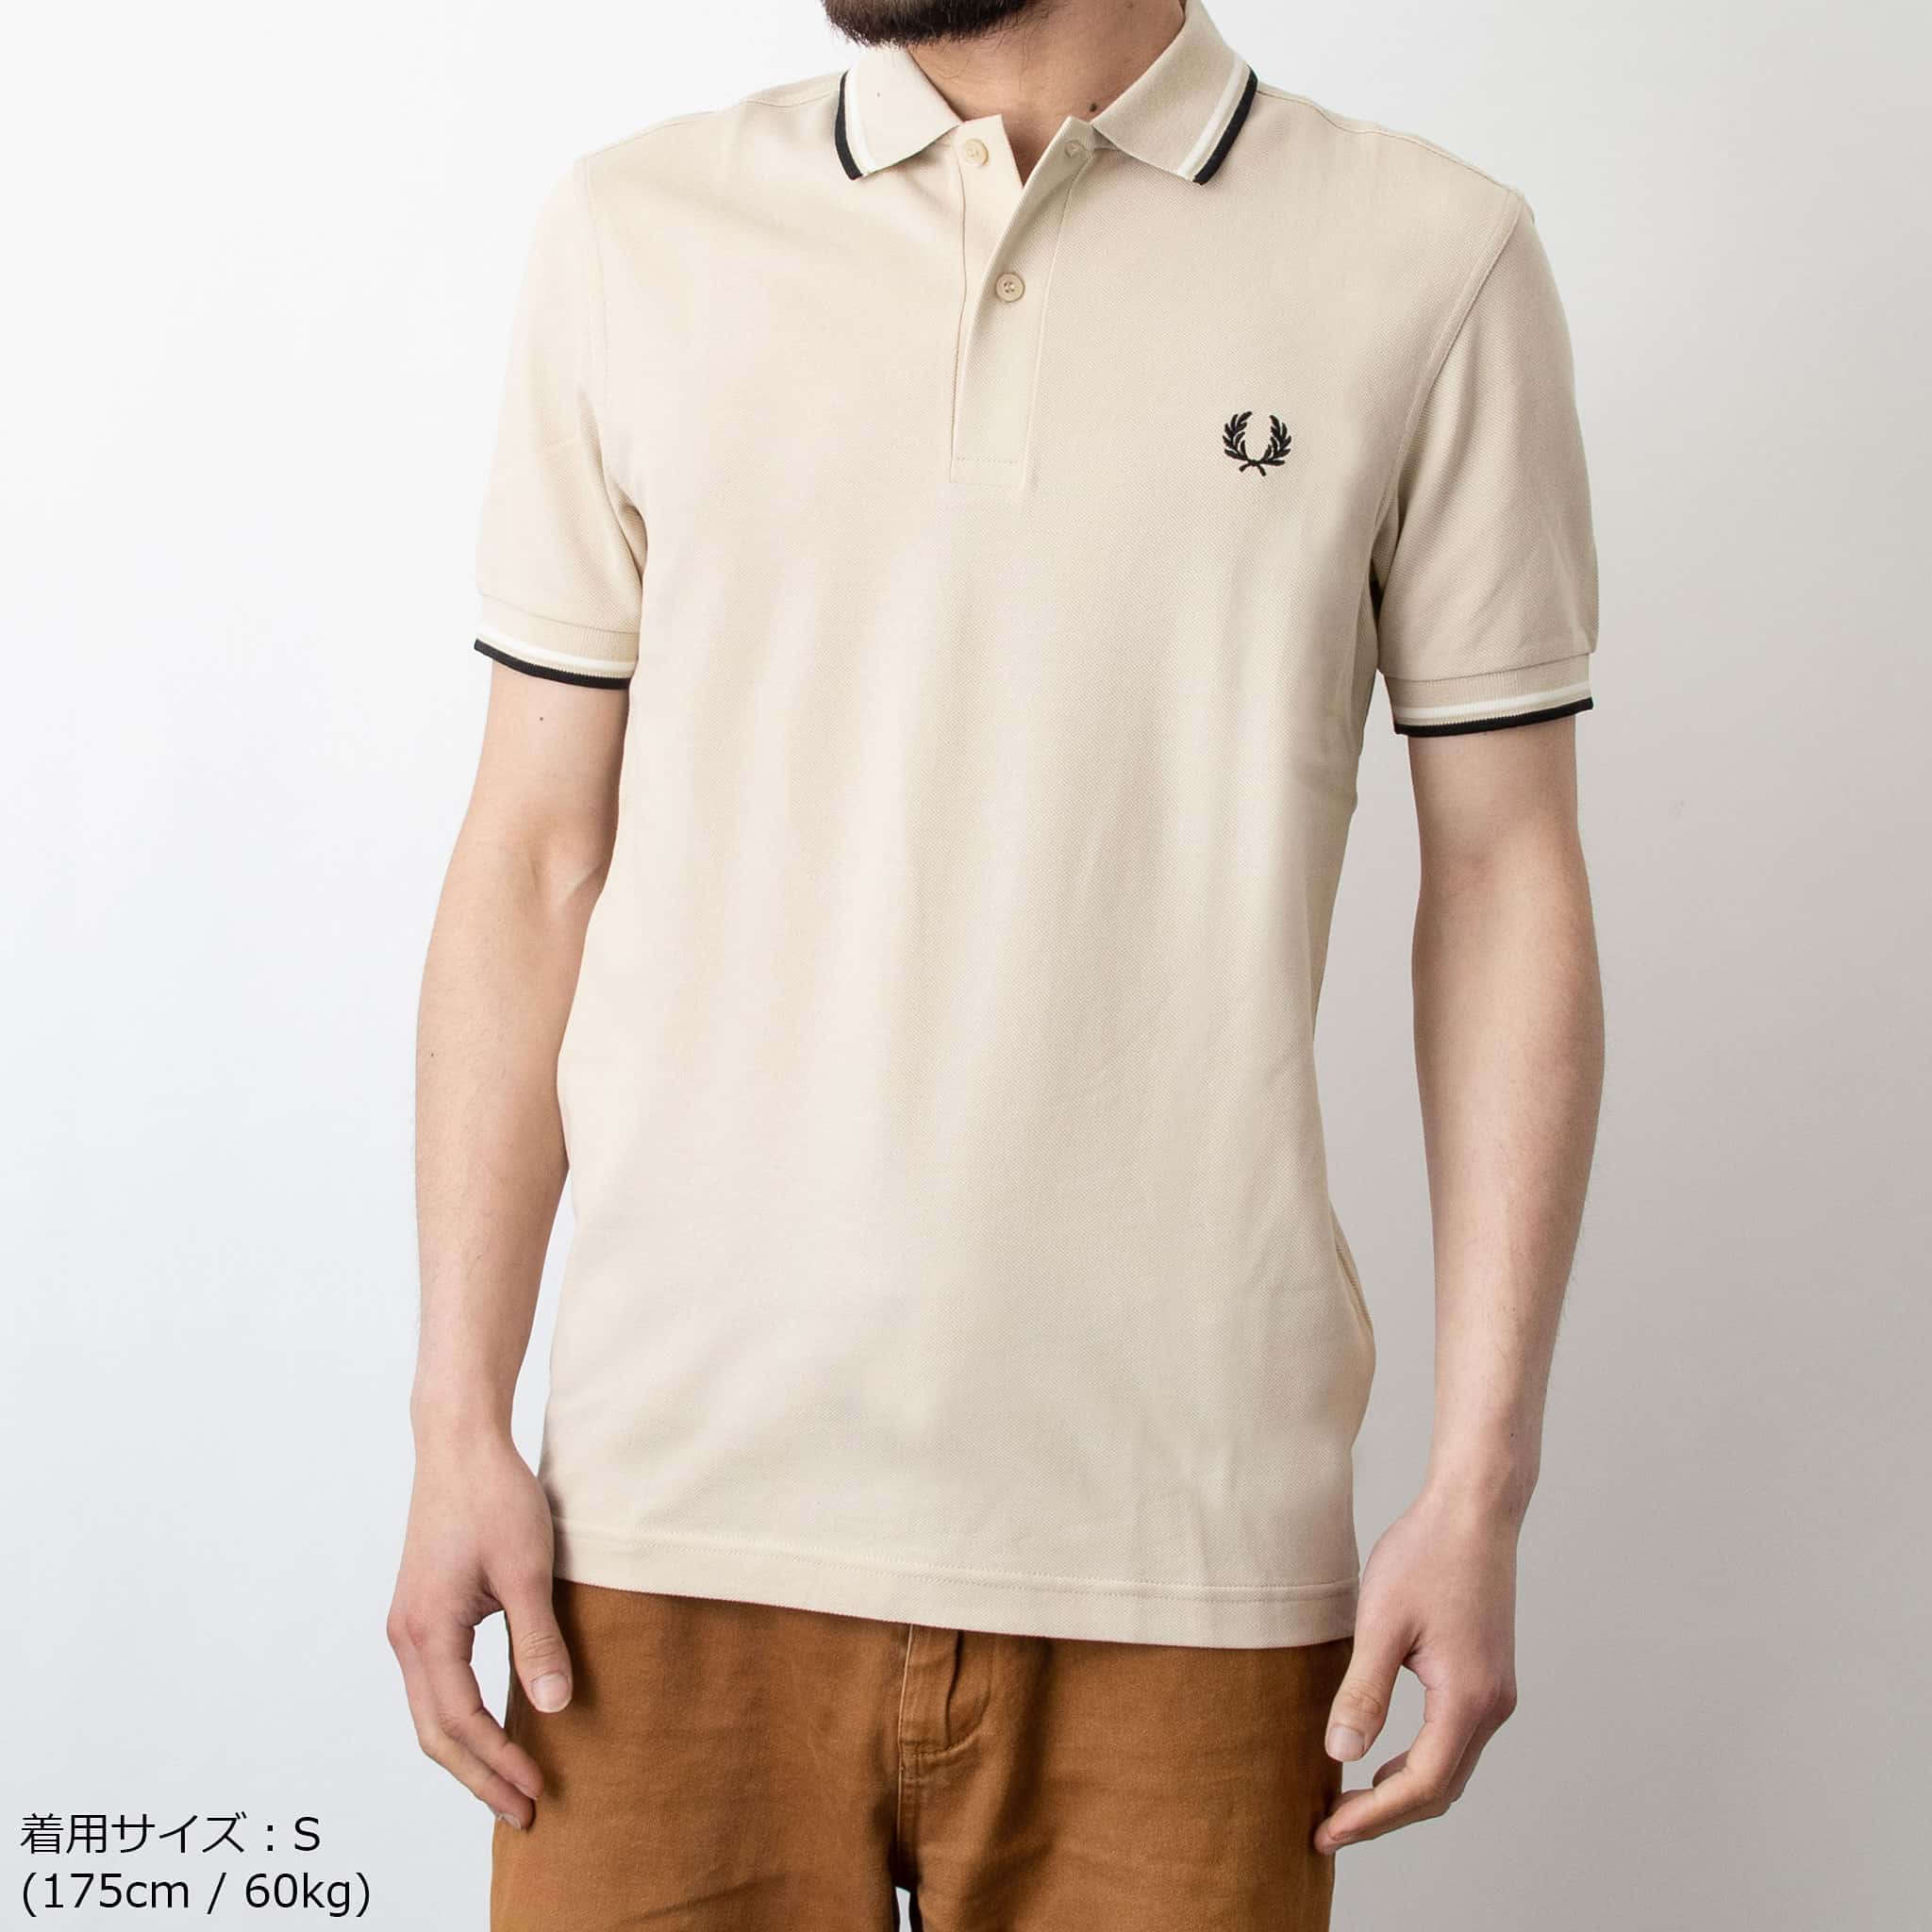 FRED PERRY THE FRED PERRY SHIRT M3600